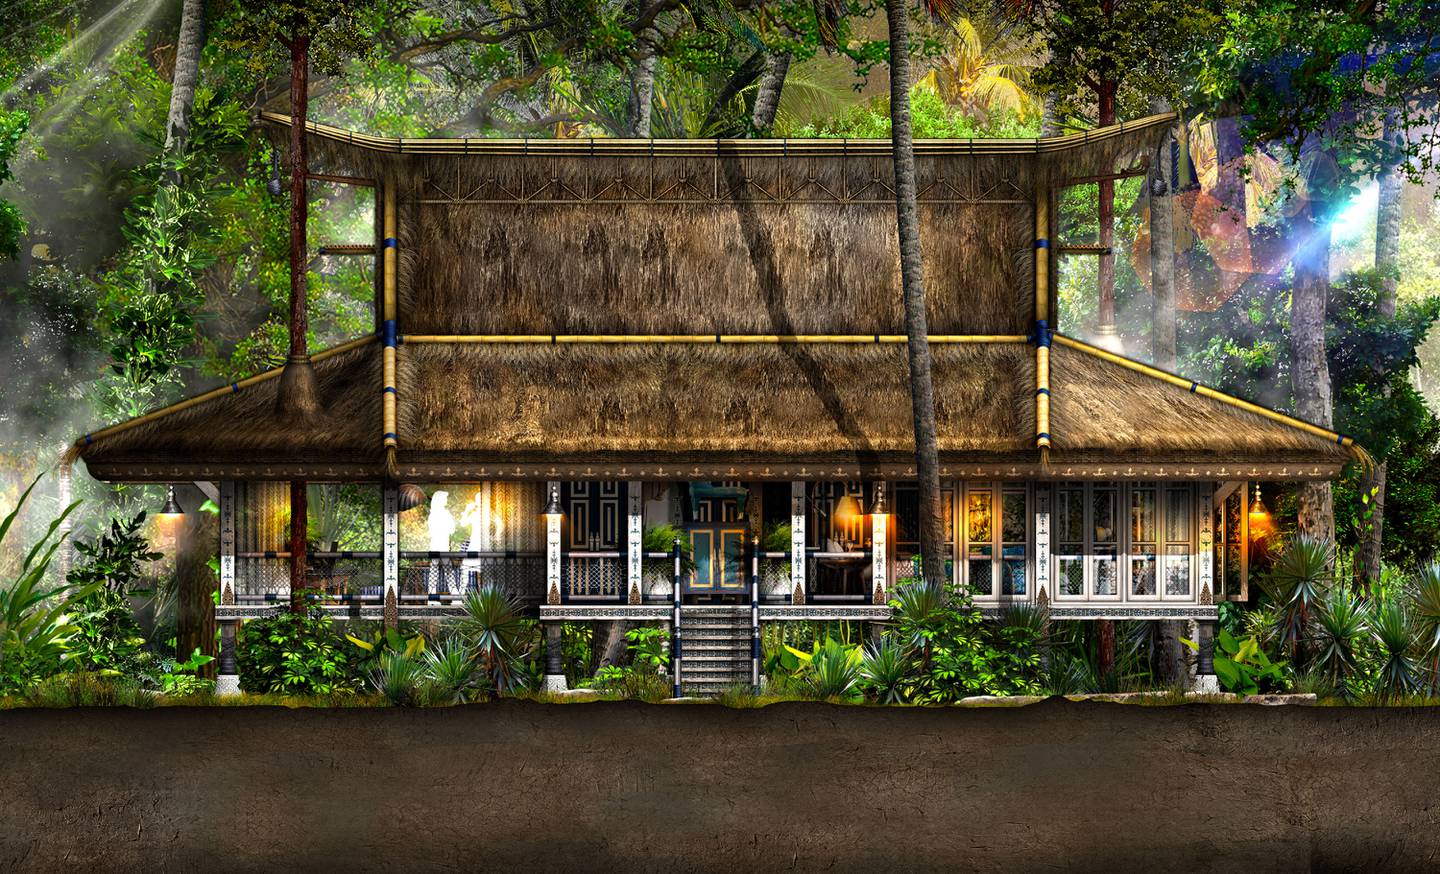 Design studio Bensley has designed three potential eco-resorts for the reserve. Photo: Sotheby's Concierge Auctions